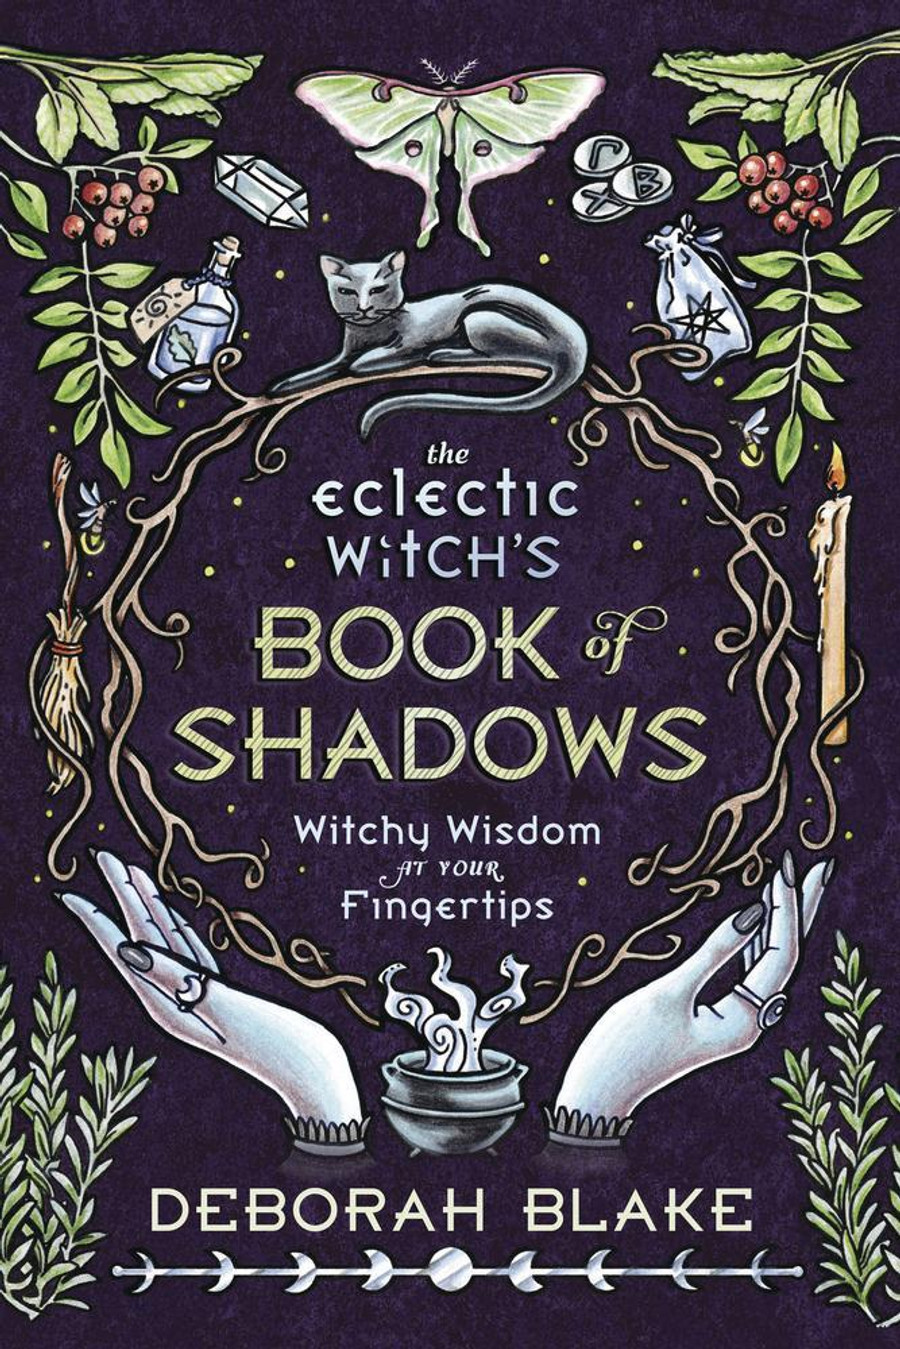 Eclectic Witch's Book of Shadows by Deborah Blake